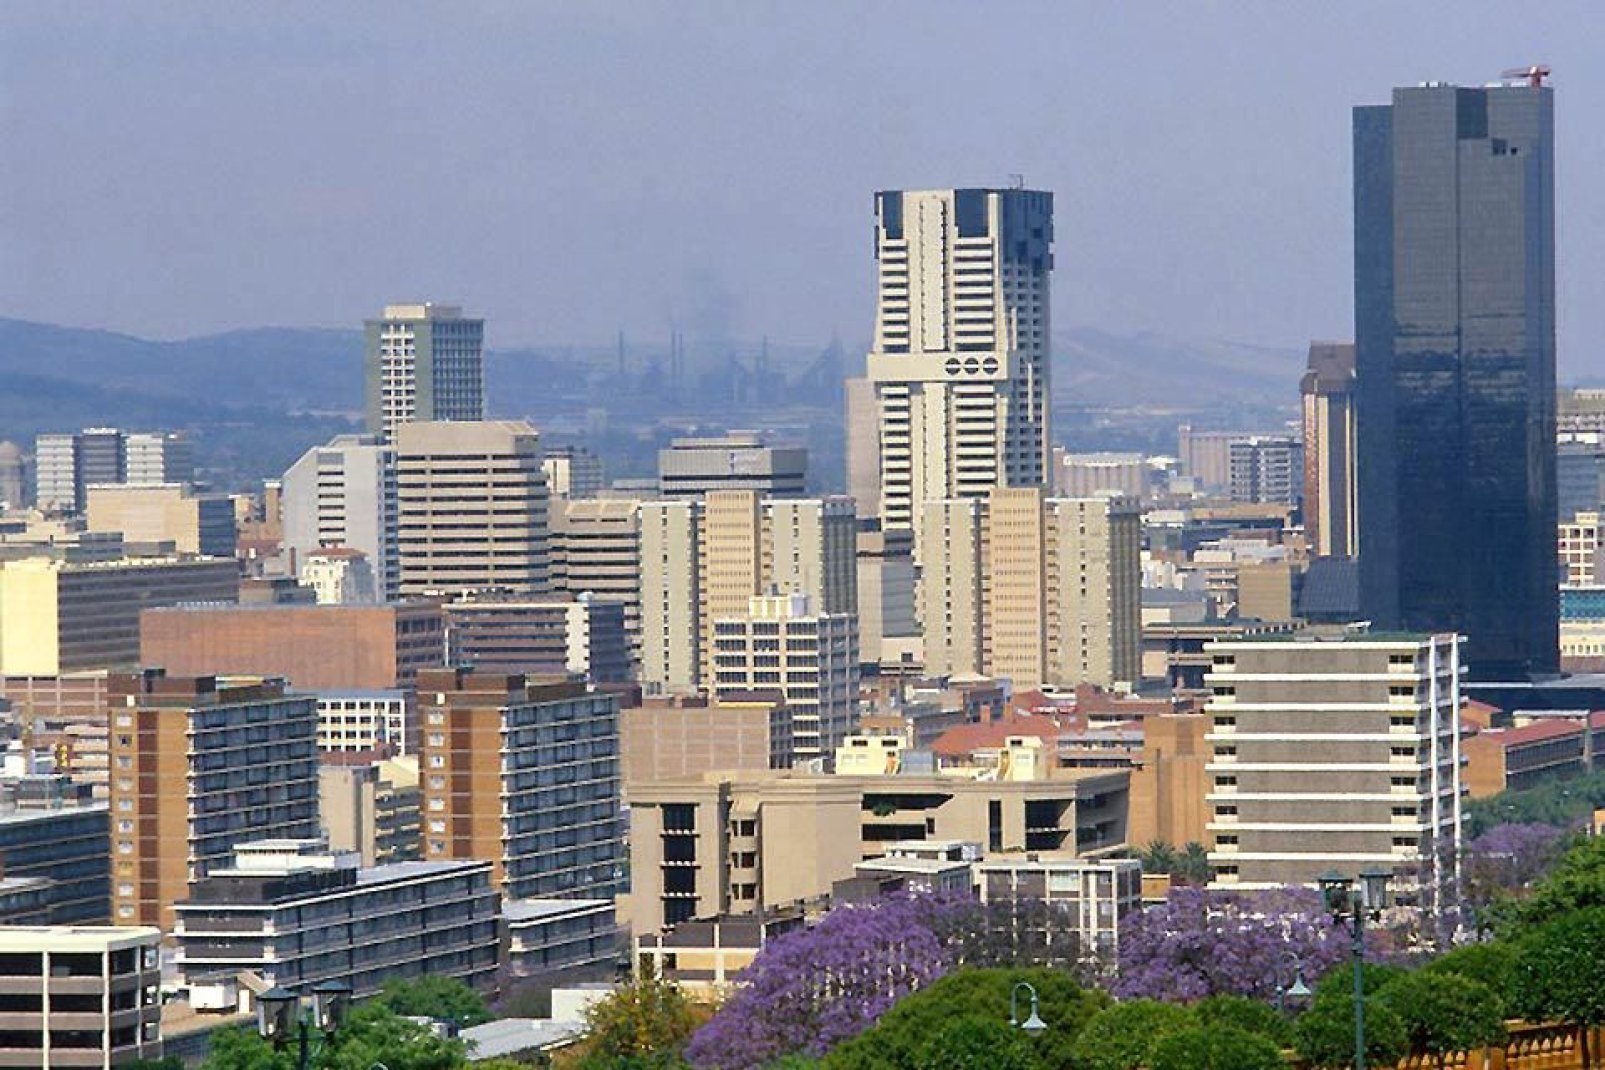 The former South African capital of Transvaal is rather touristy. Pretoria is a lively city that knows how to make the most of its assets.